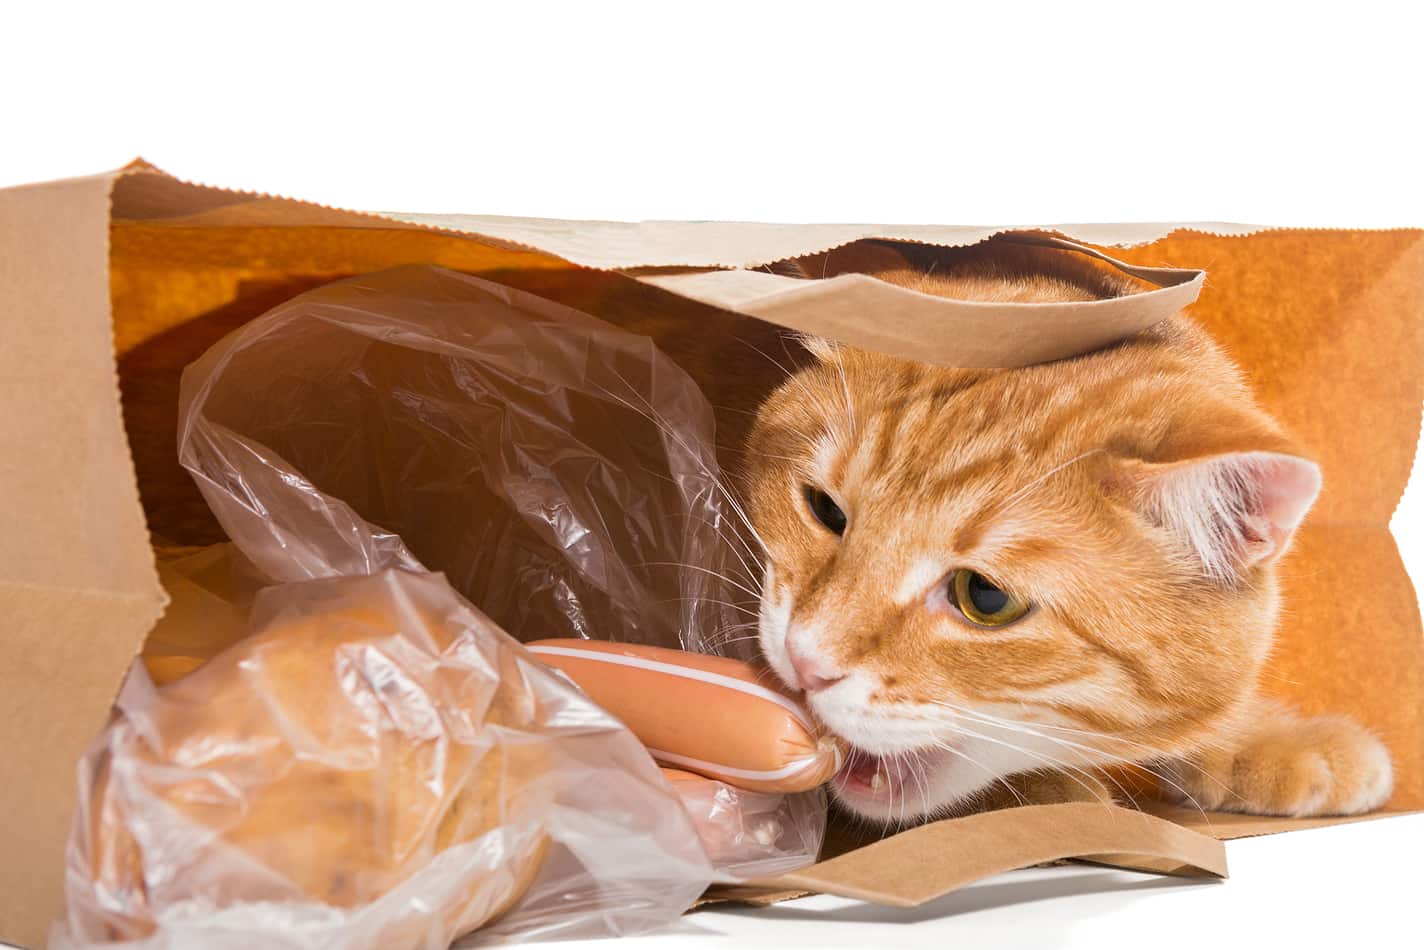 Why do cats eat bags and plastic?